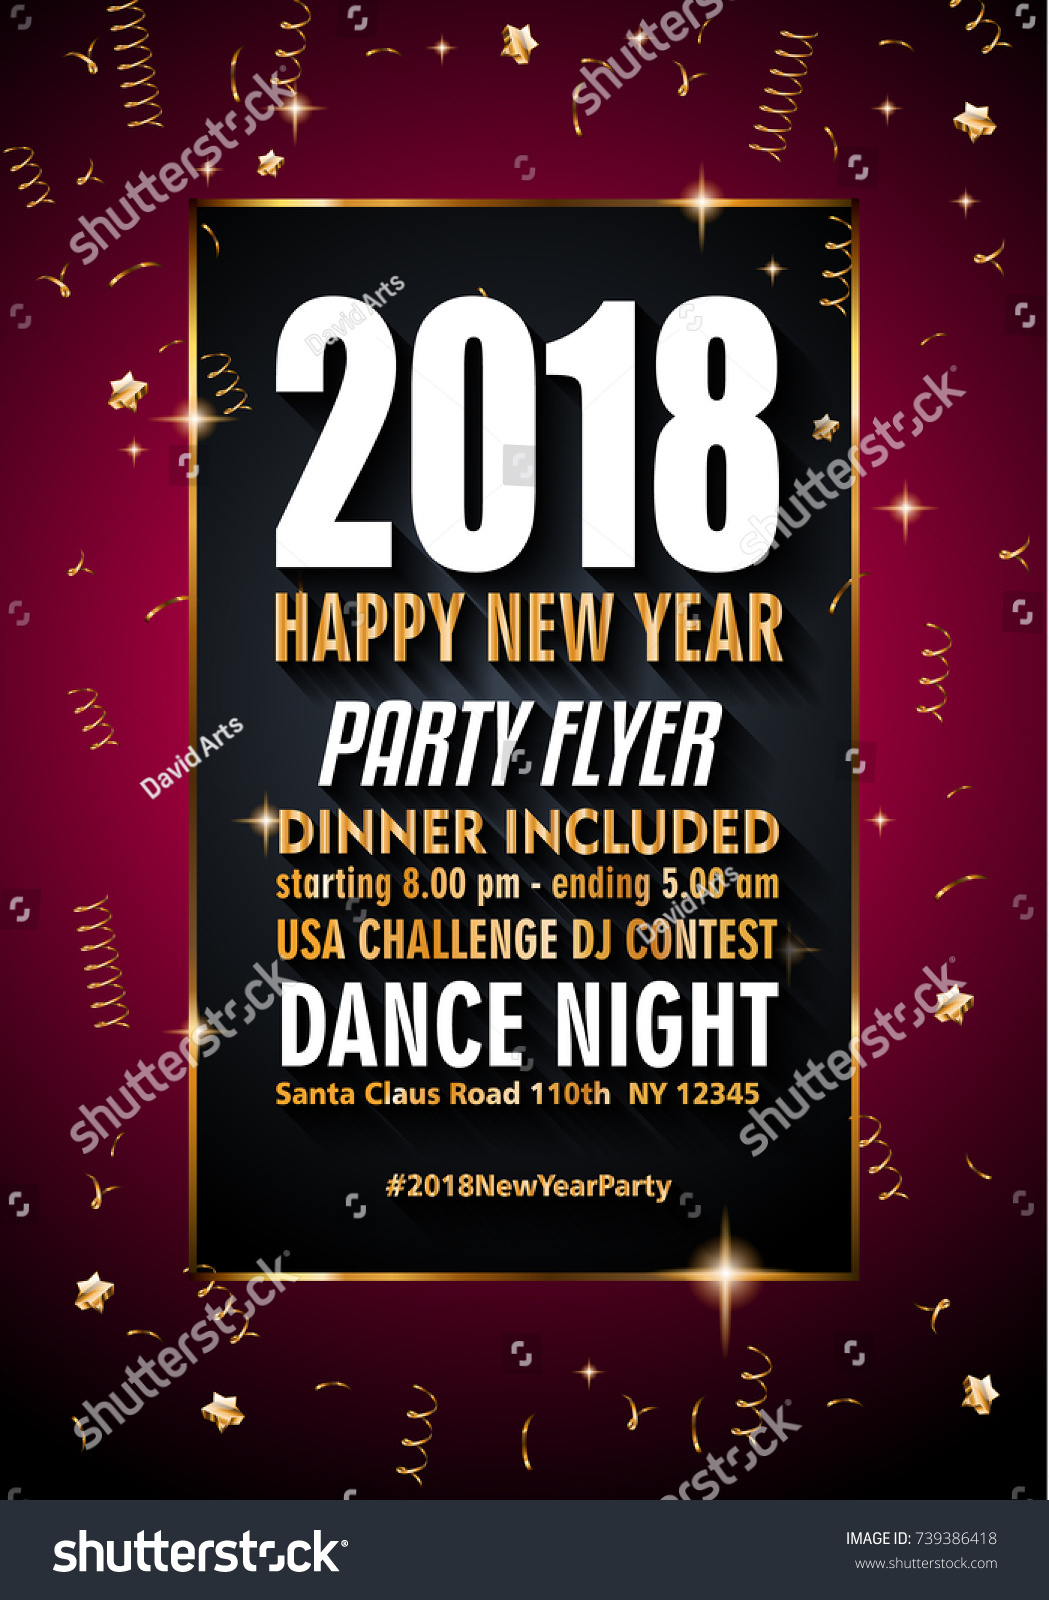 2018 Happy New Year Background for your Seasonal Flyers and Greetings Card or Christmas themed invitations